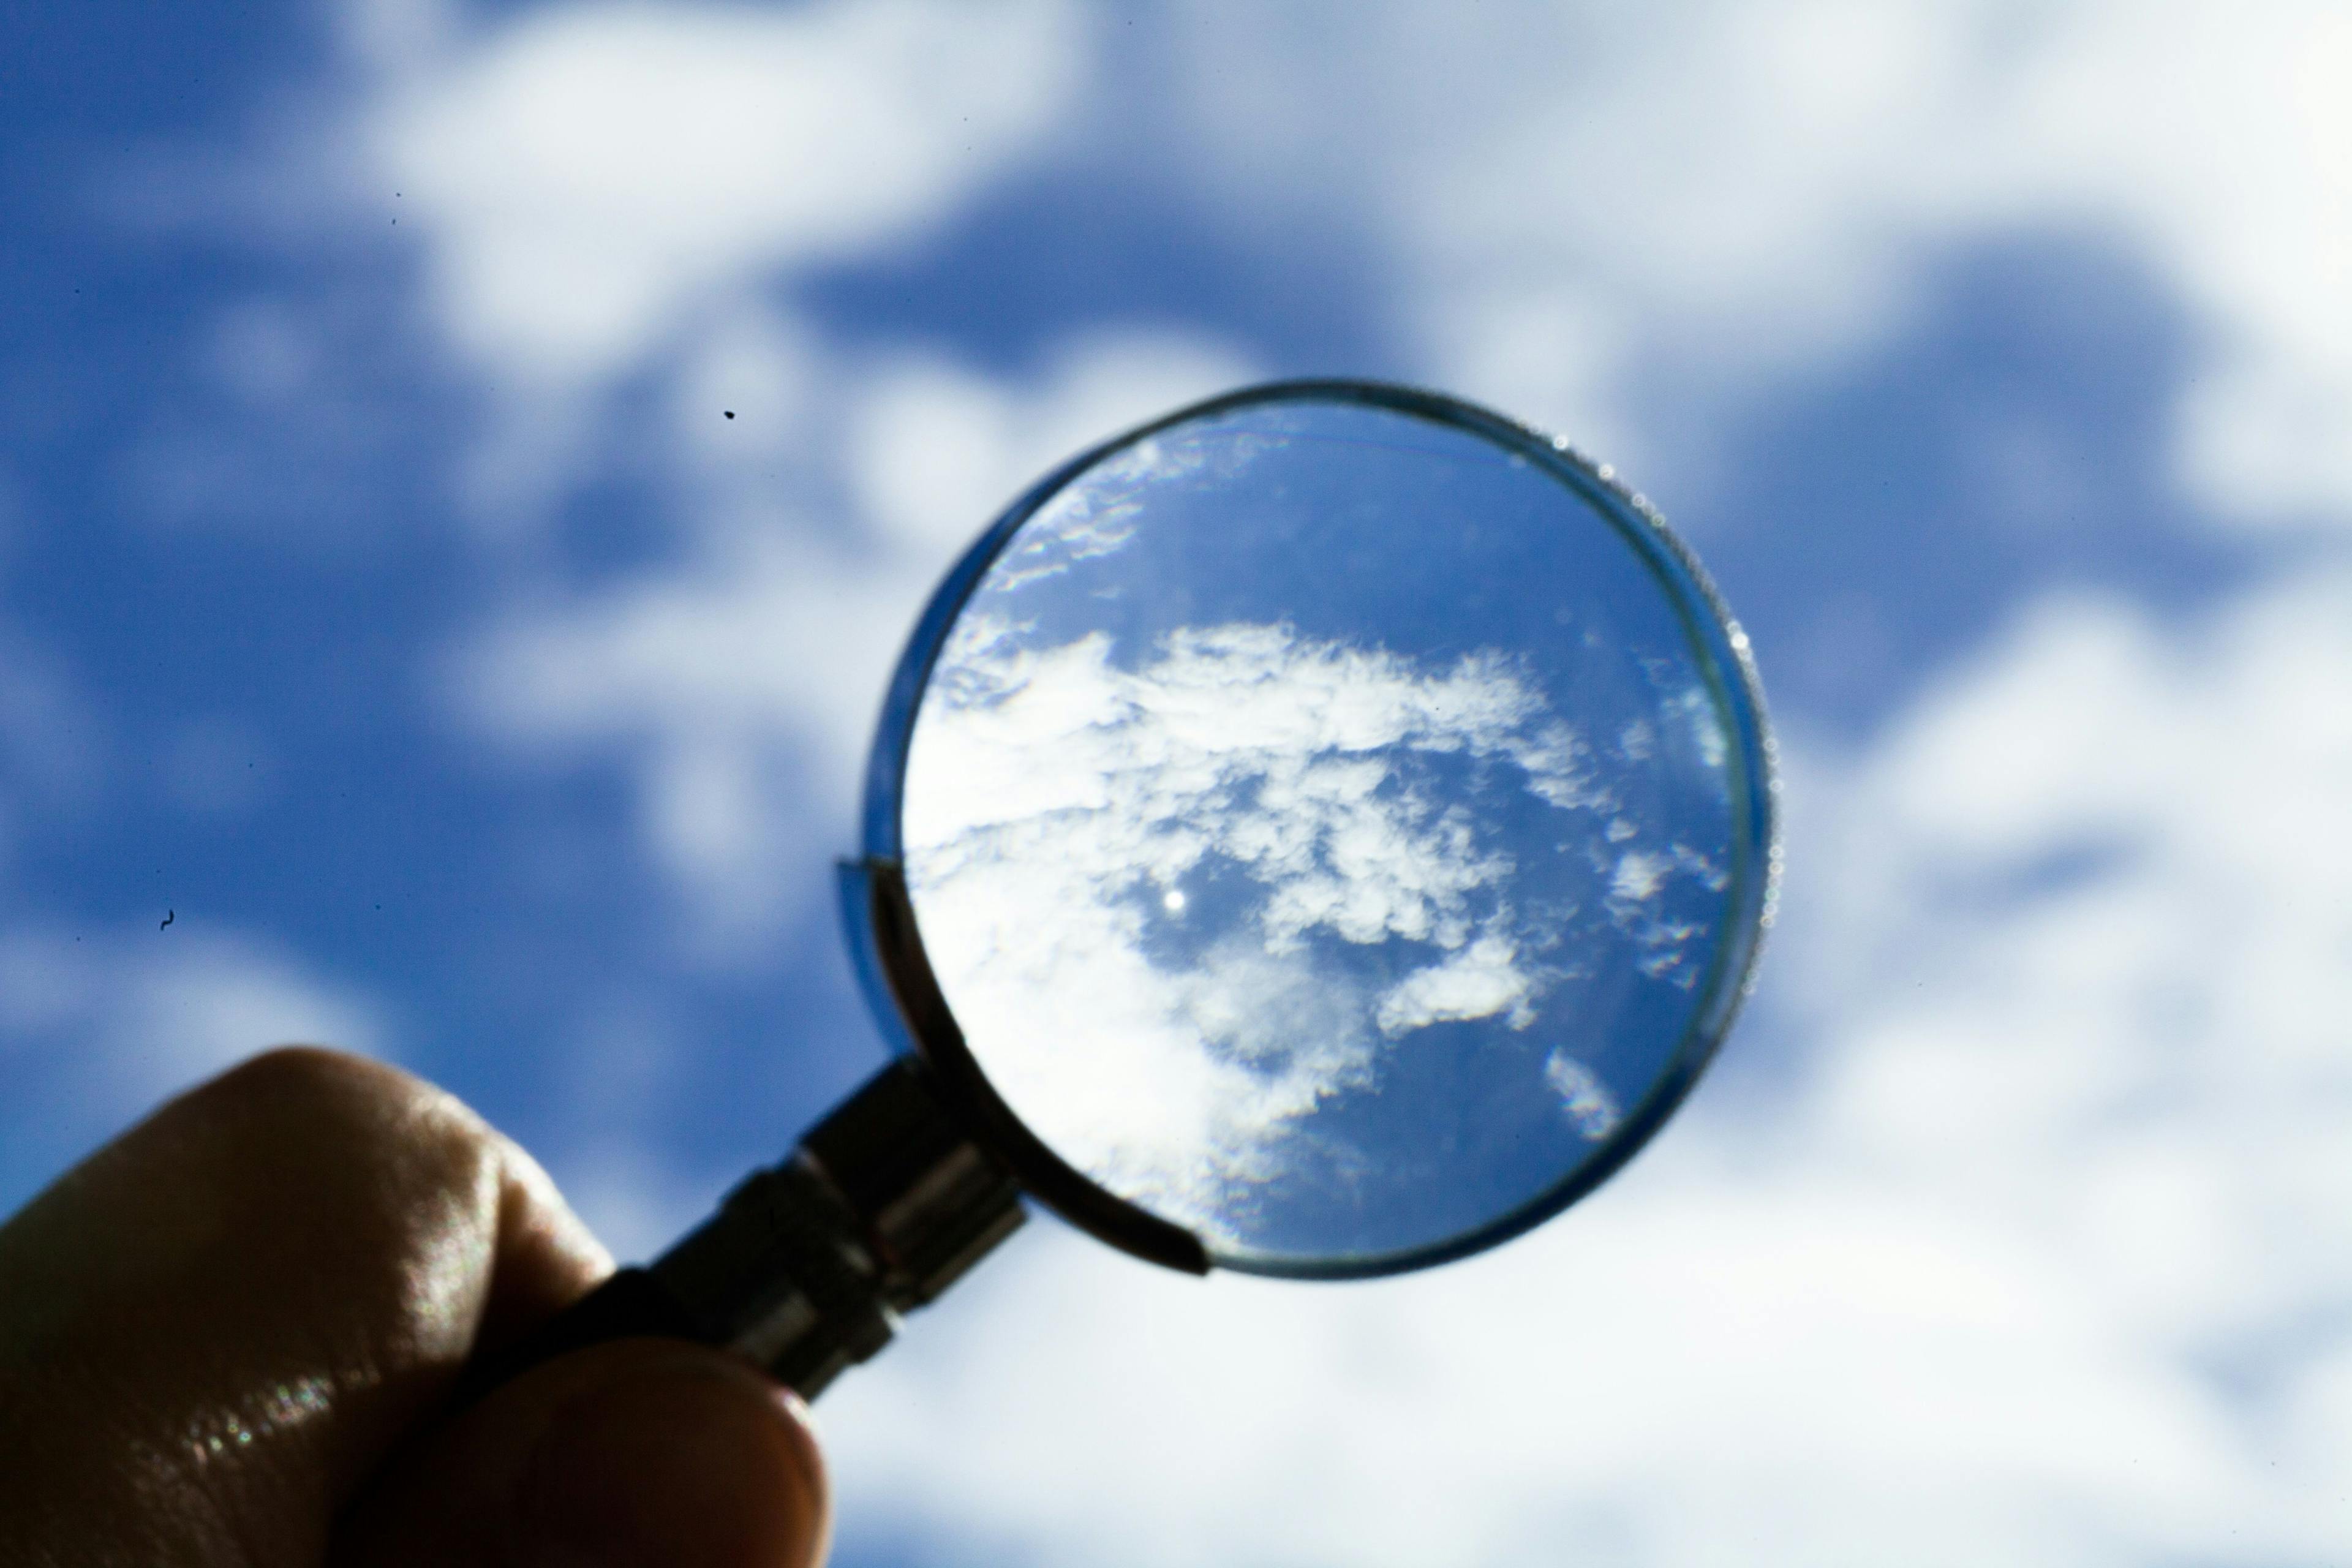 magnifying glass held to sky for clear view of clouds